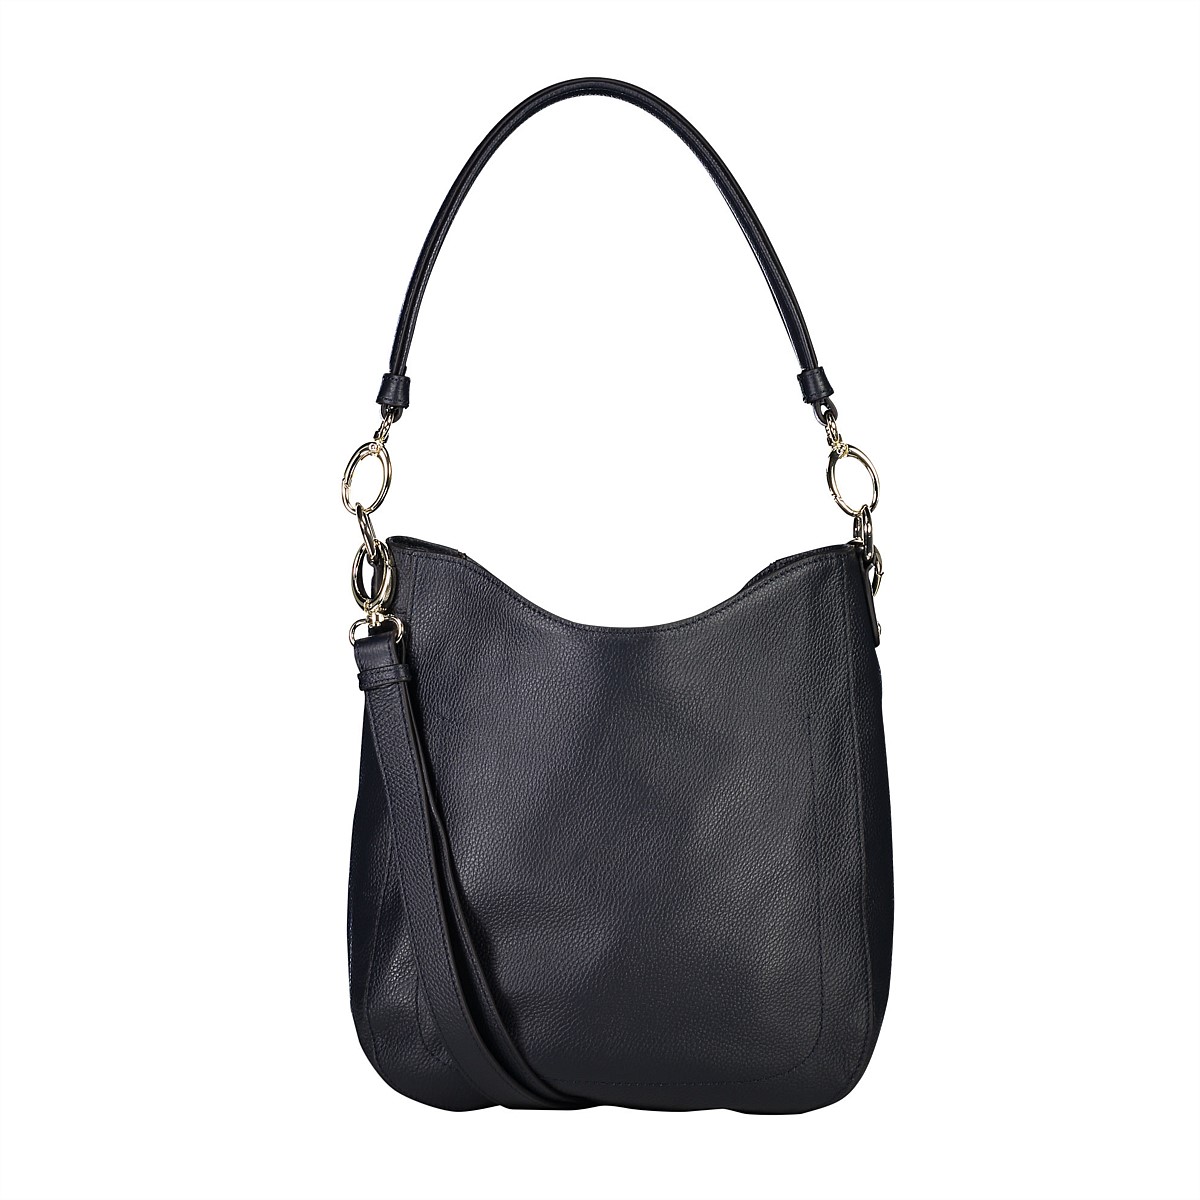 Women's Handbags Online | Air New Zealand's Airpoints™ Store